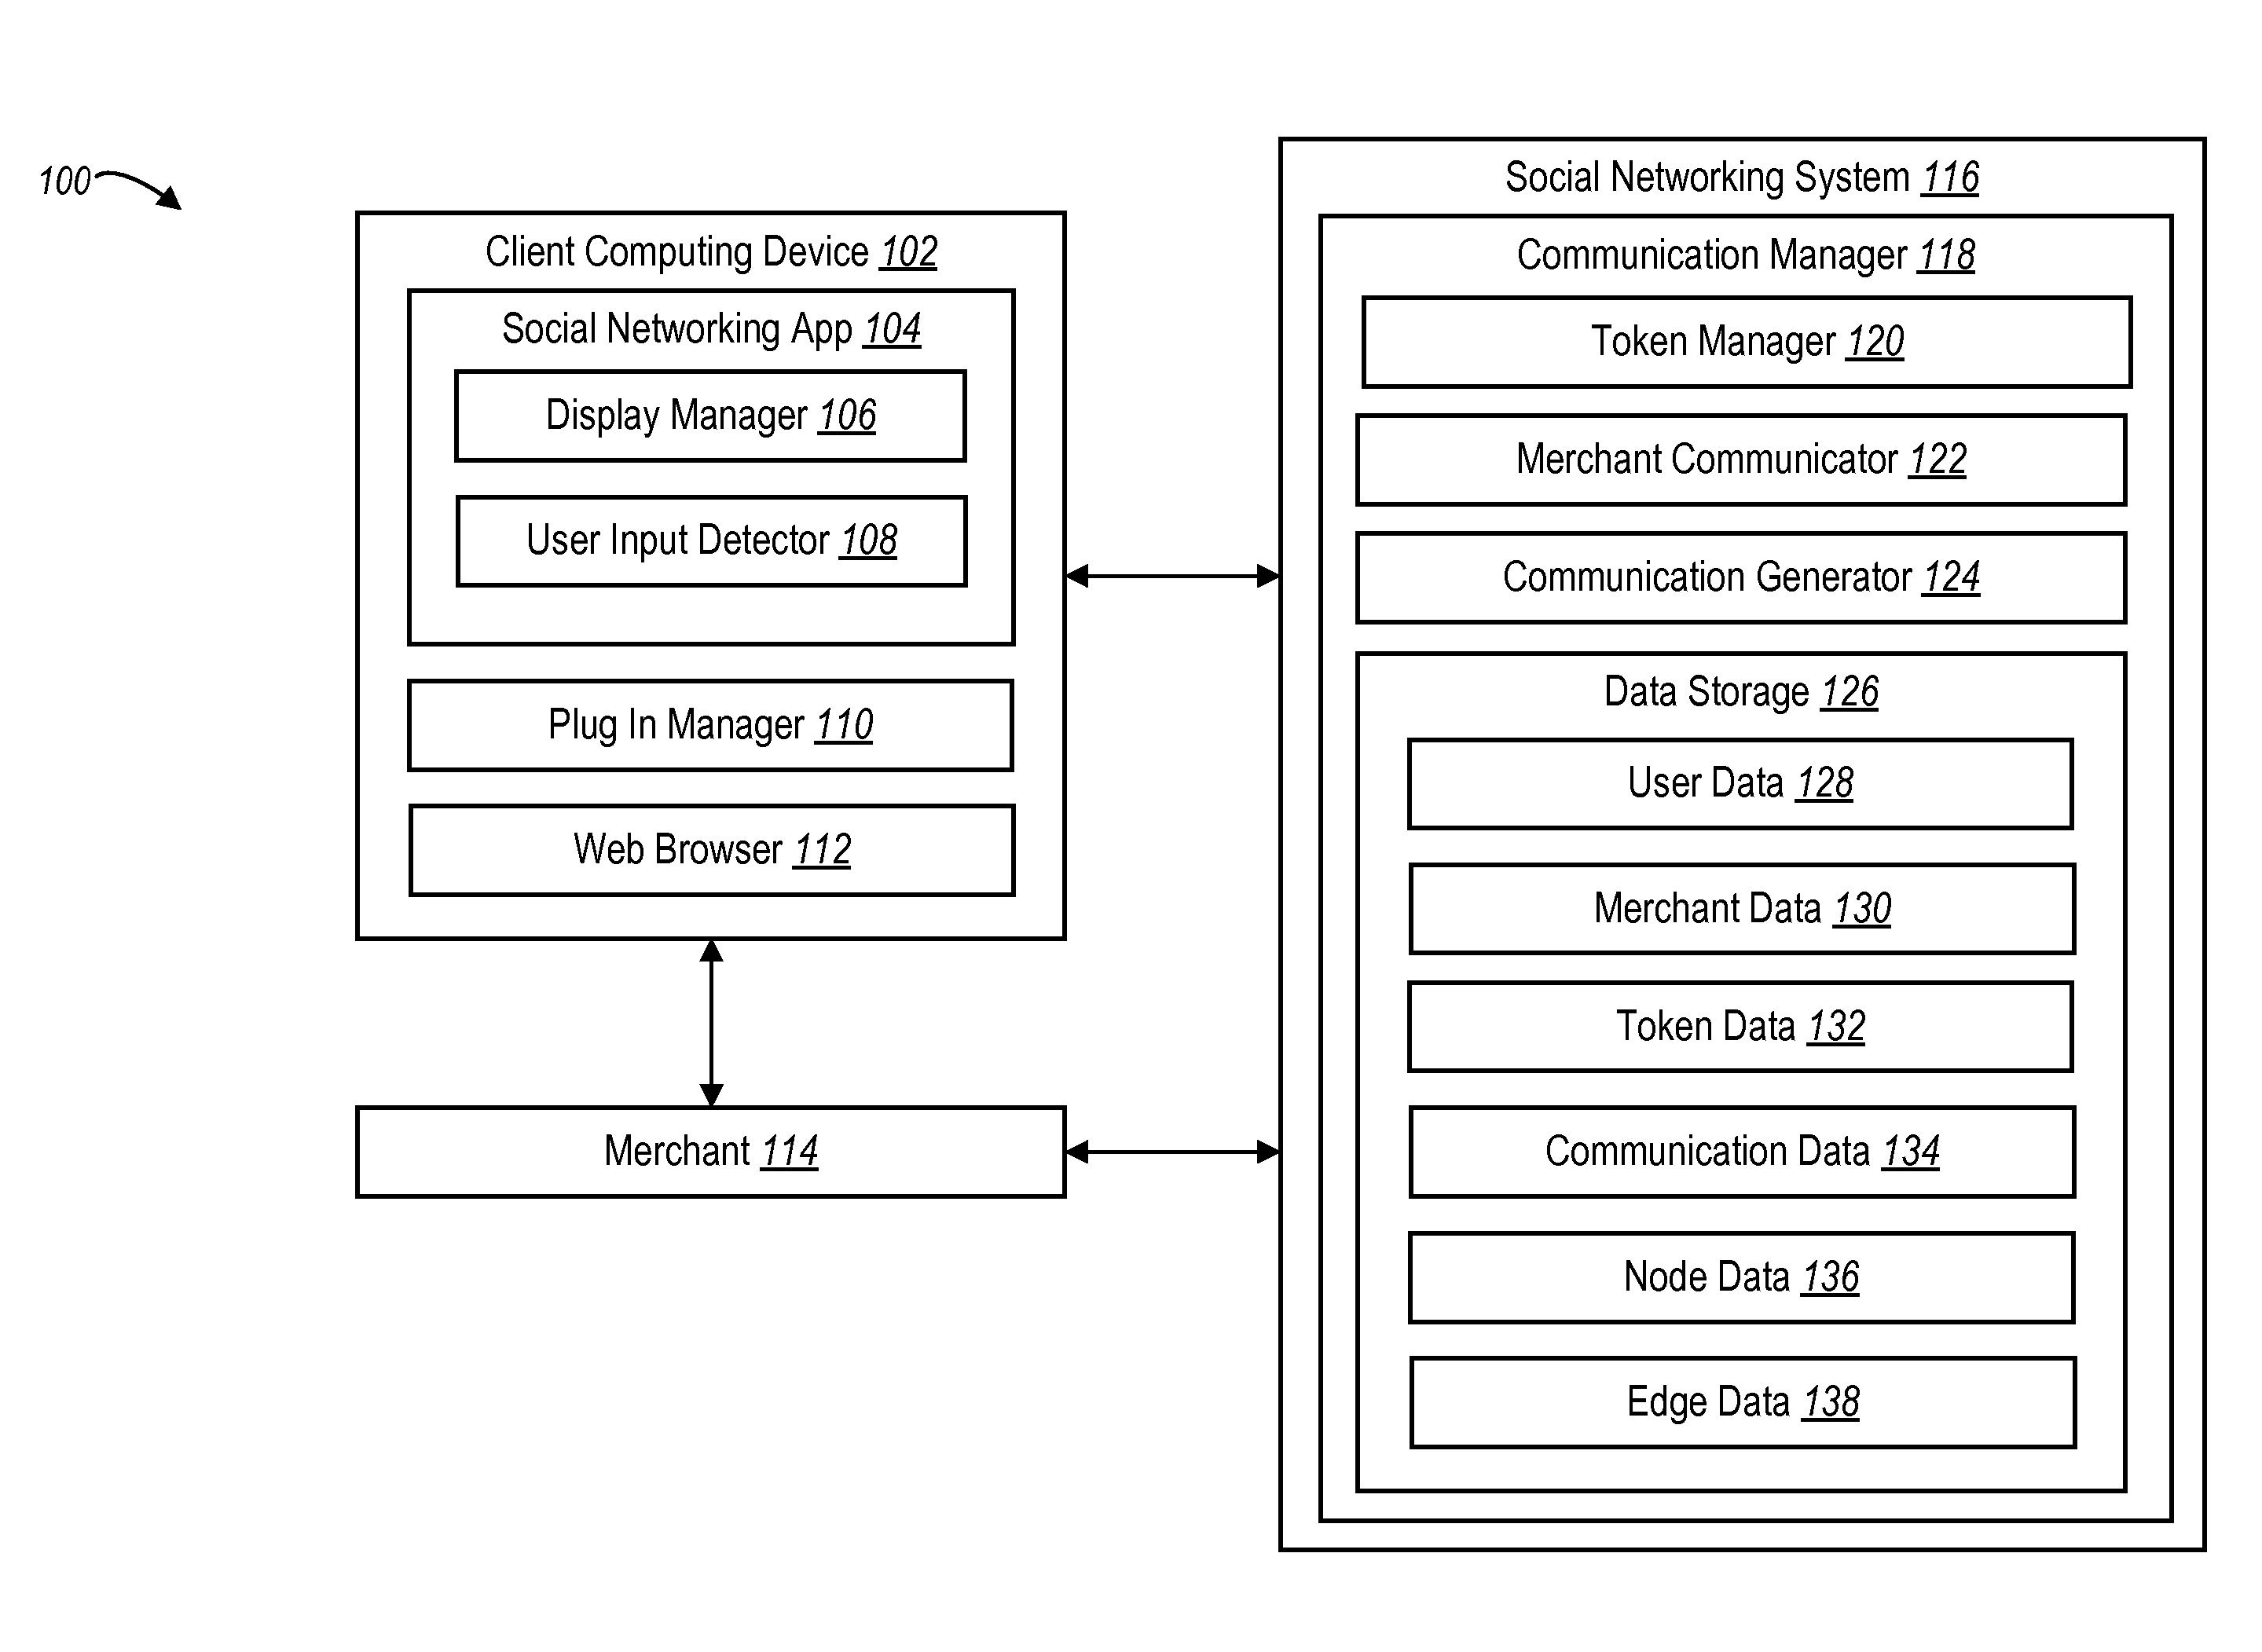 User communications with a merchant through a social networking system